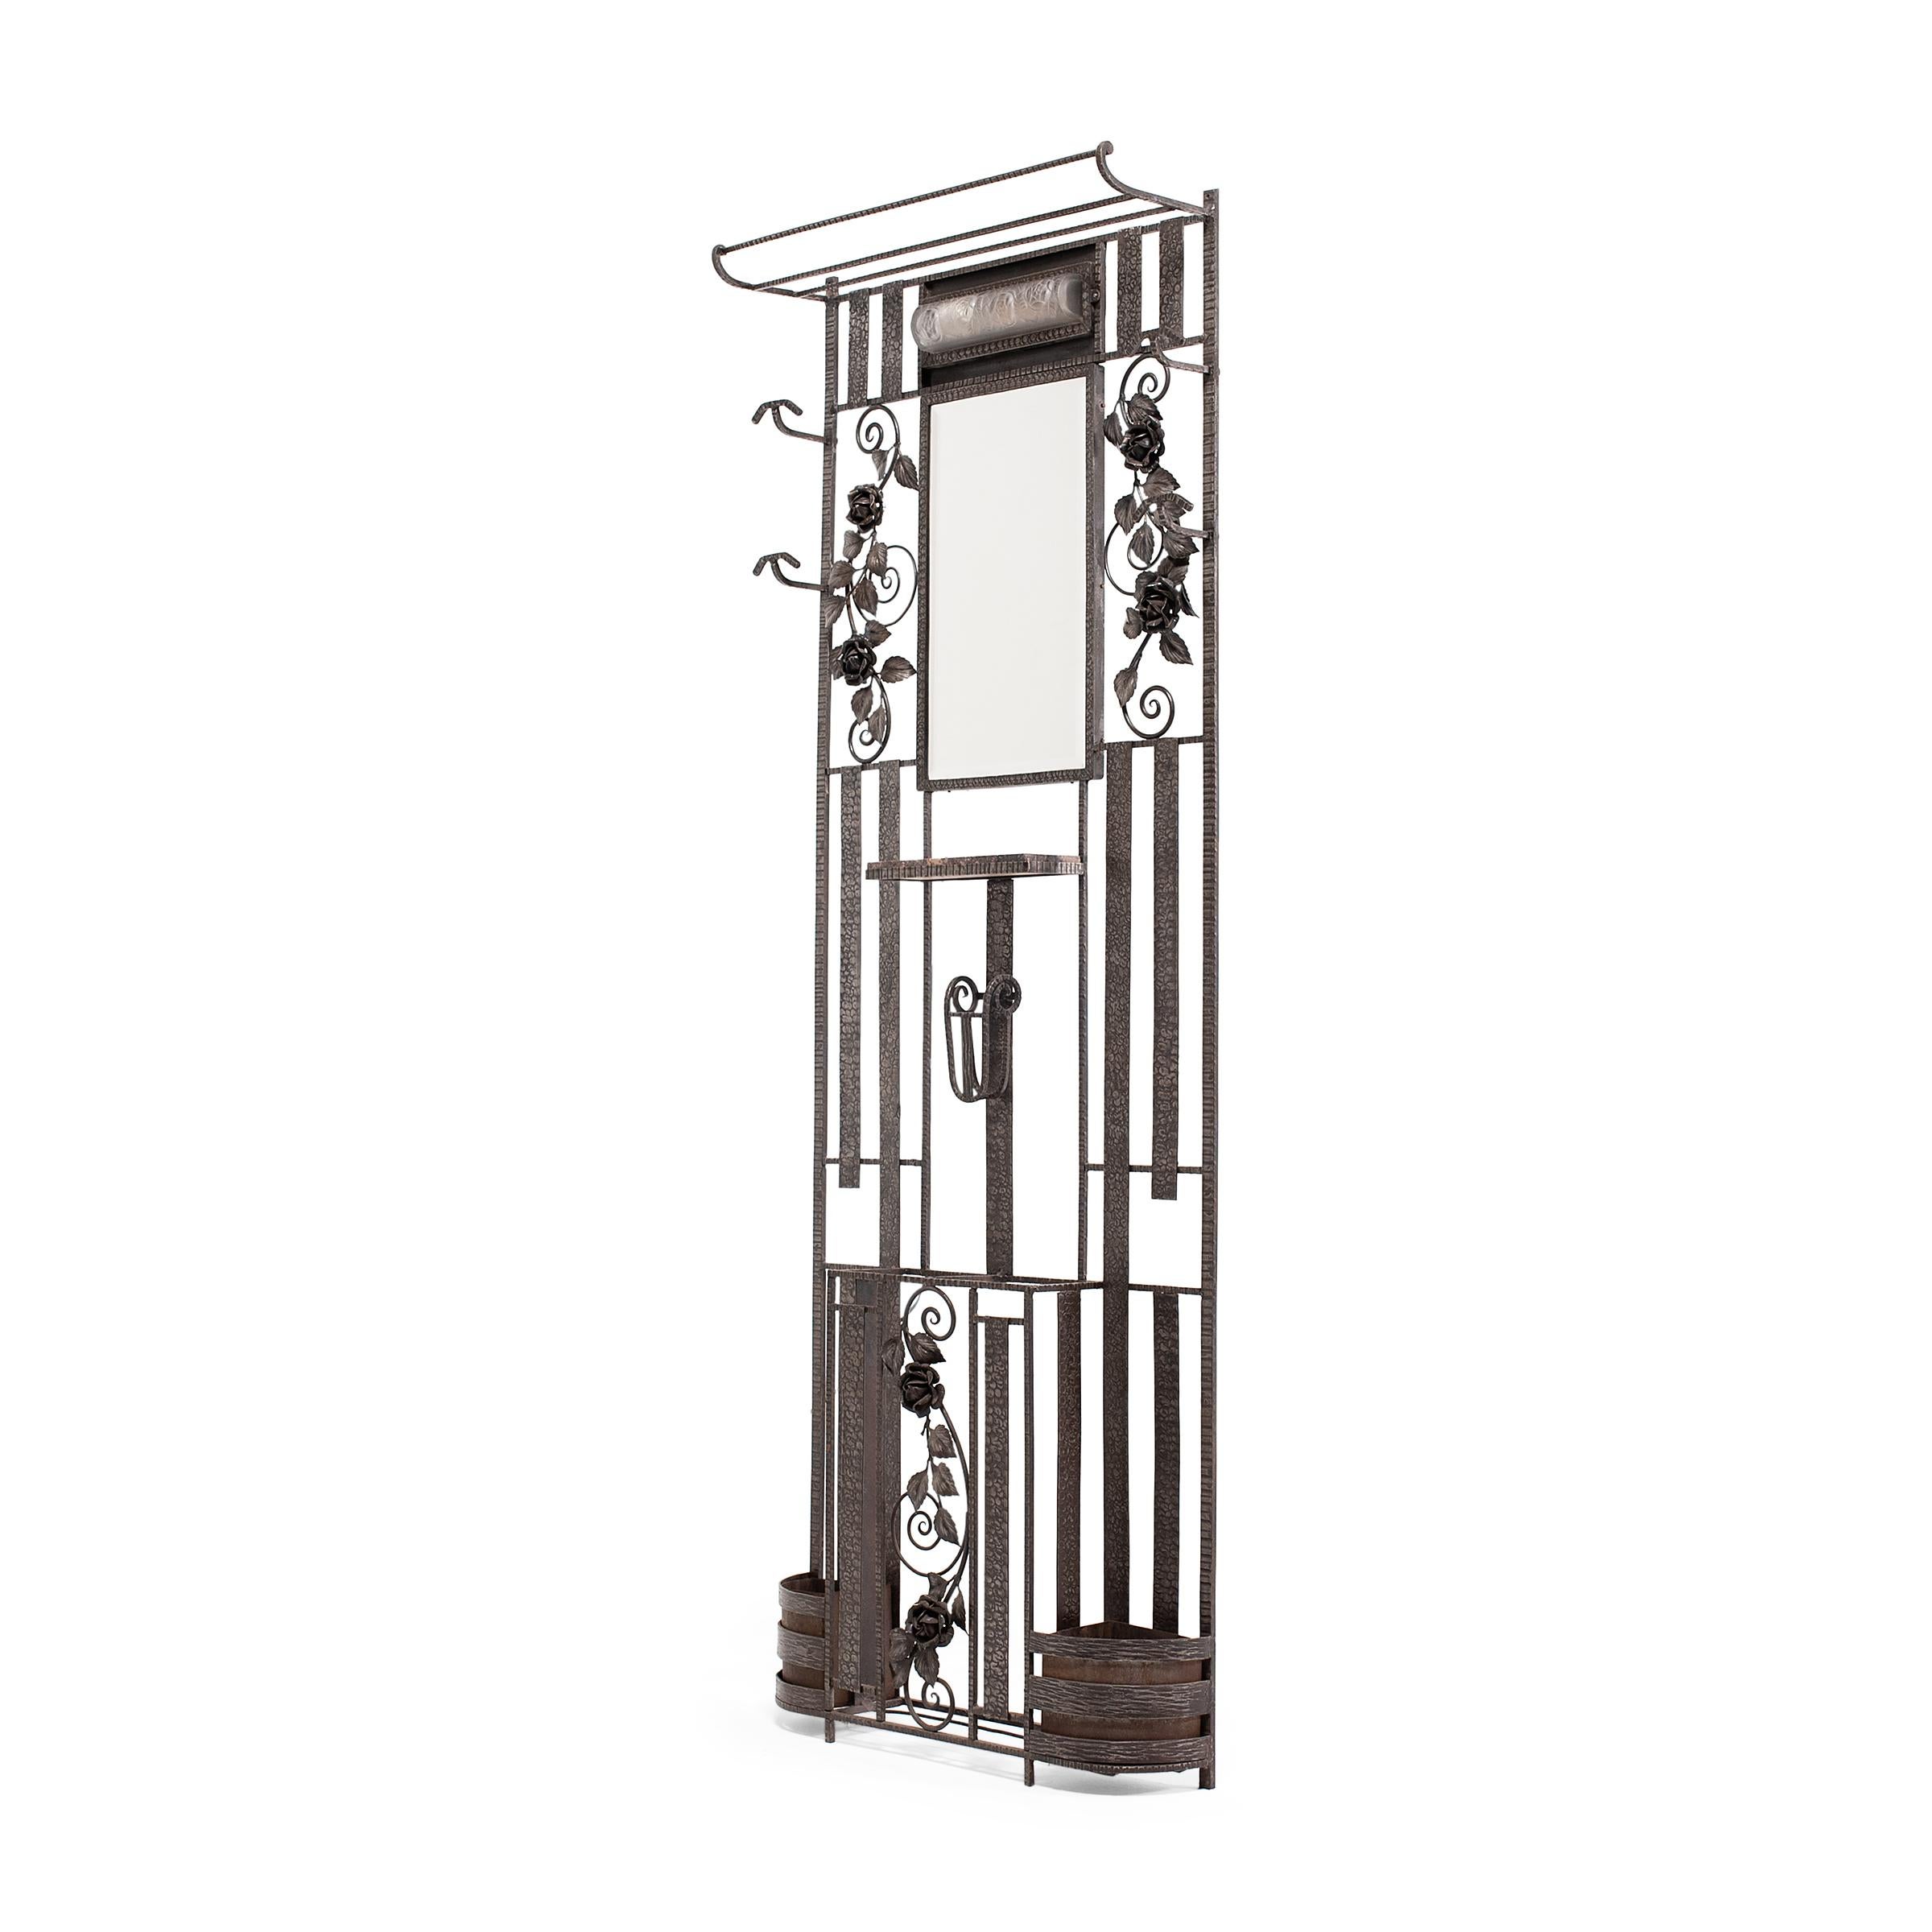 This fantastic French wrought iron foyer rack or hall tree dates to the Art Deco period of the 1920-30s. The coat rack is wonderfully decorated with a hammered and crimped texture, with panels of finely sculpted roses atop spiral scrollwork. The